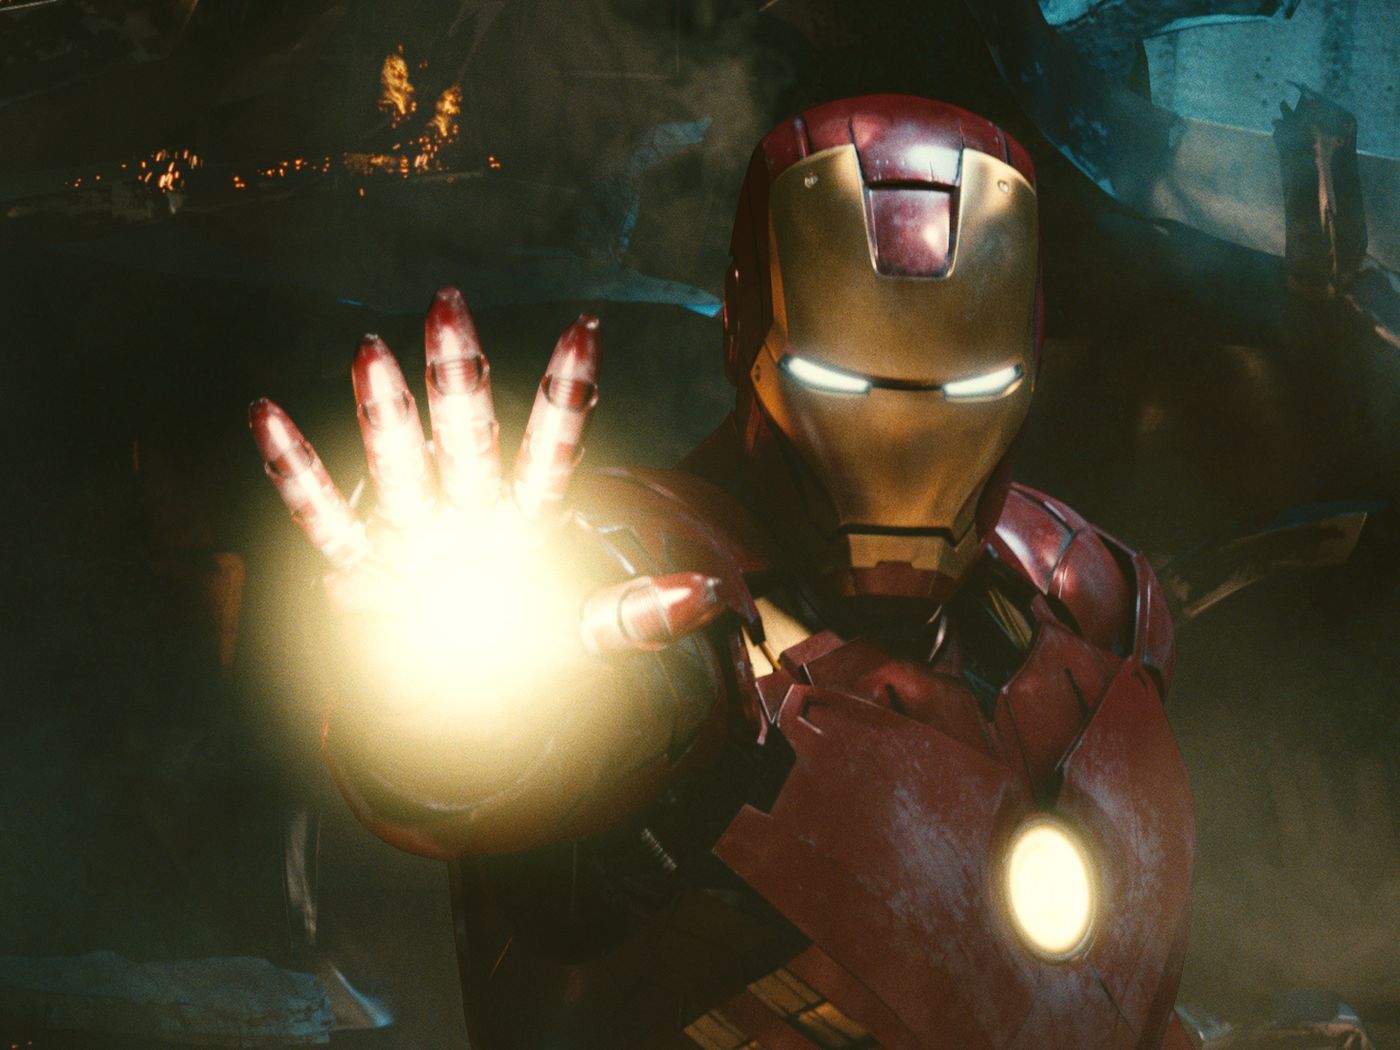 Iron Man VR now set for a July release date on PlayStation 4